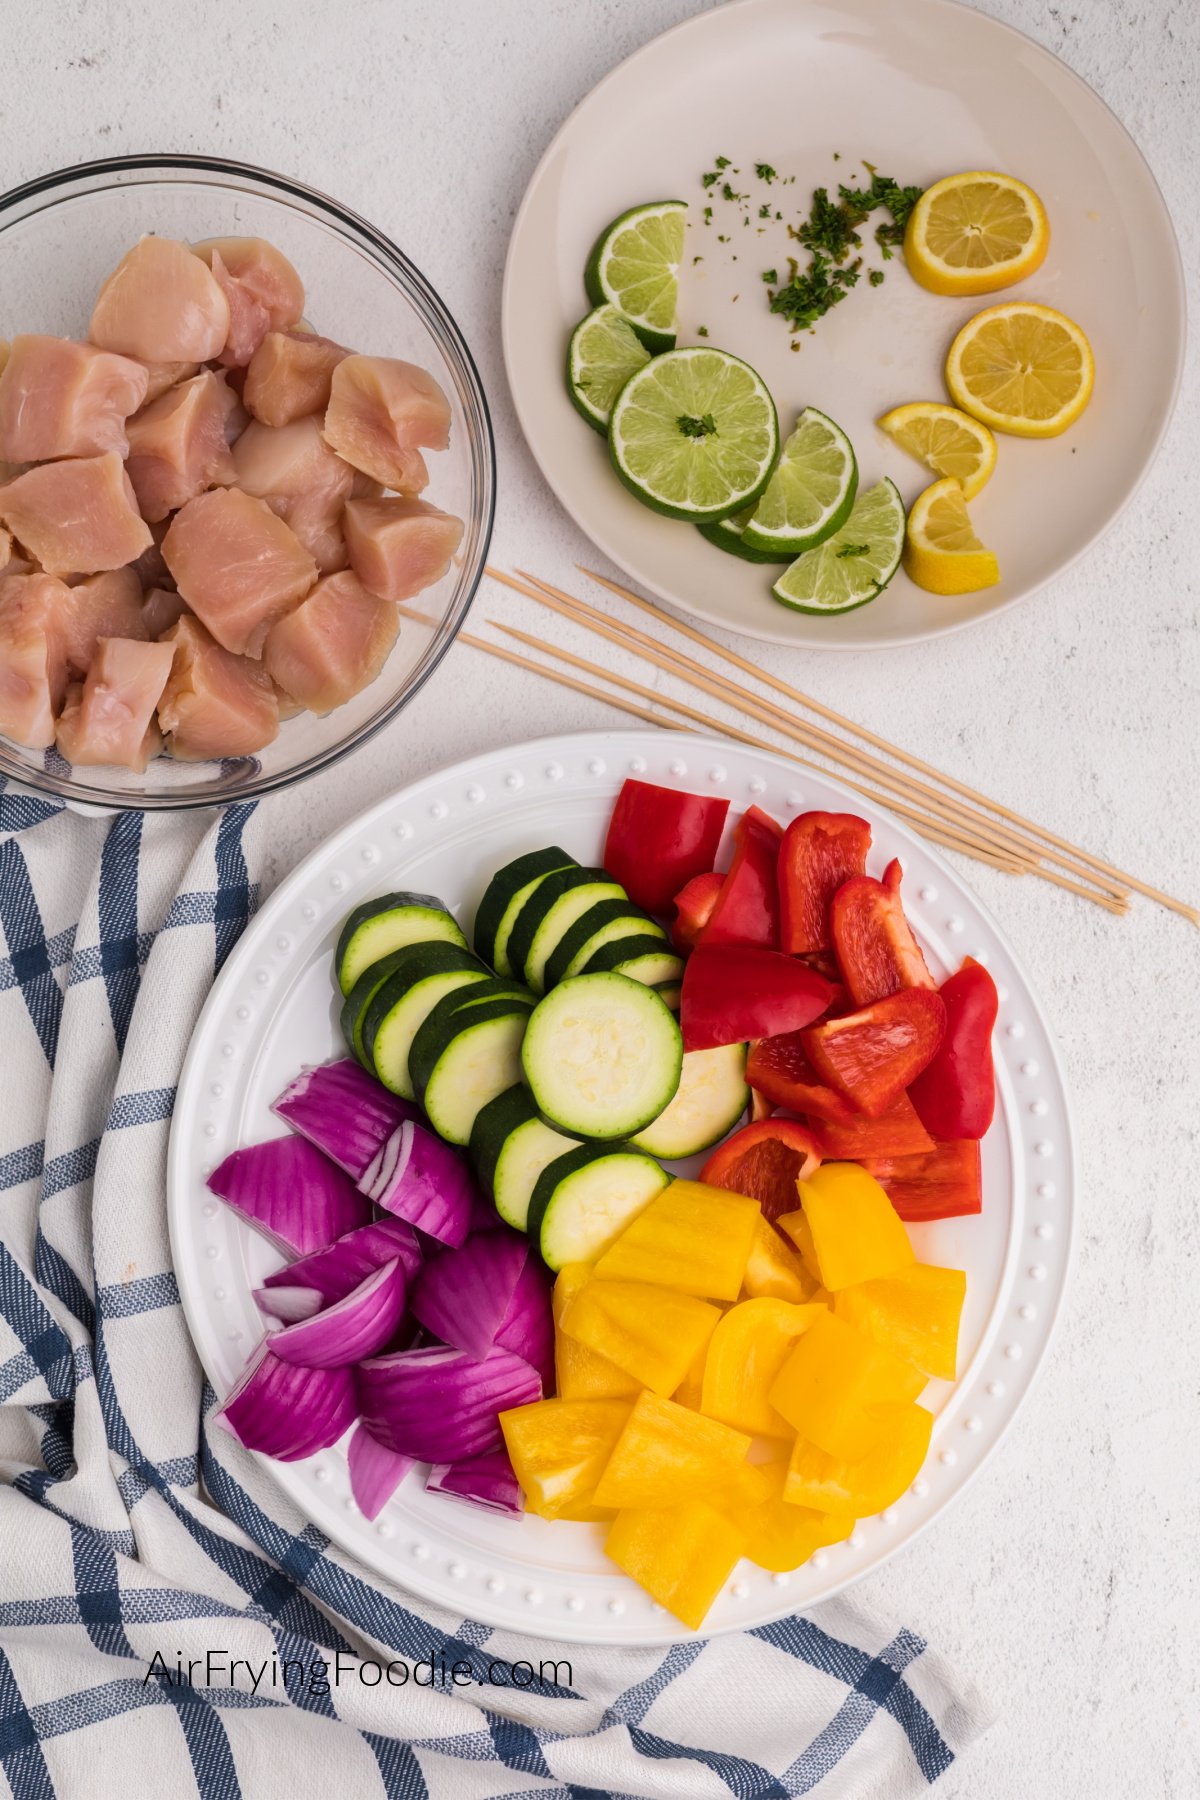 Chopped vegetables on a plate. wooden skewers, chicken bites, and lime and lemons and a plate.